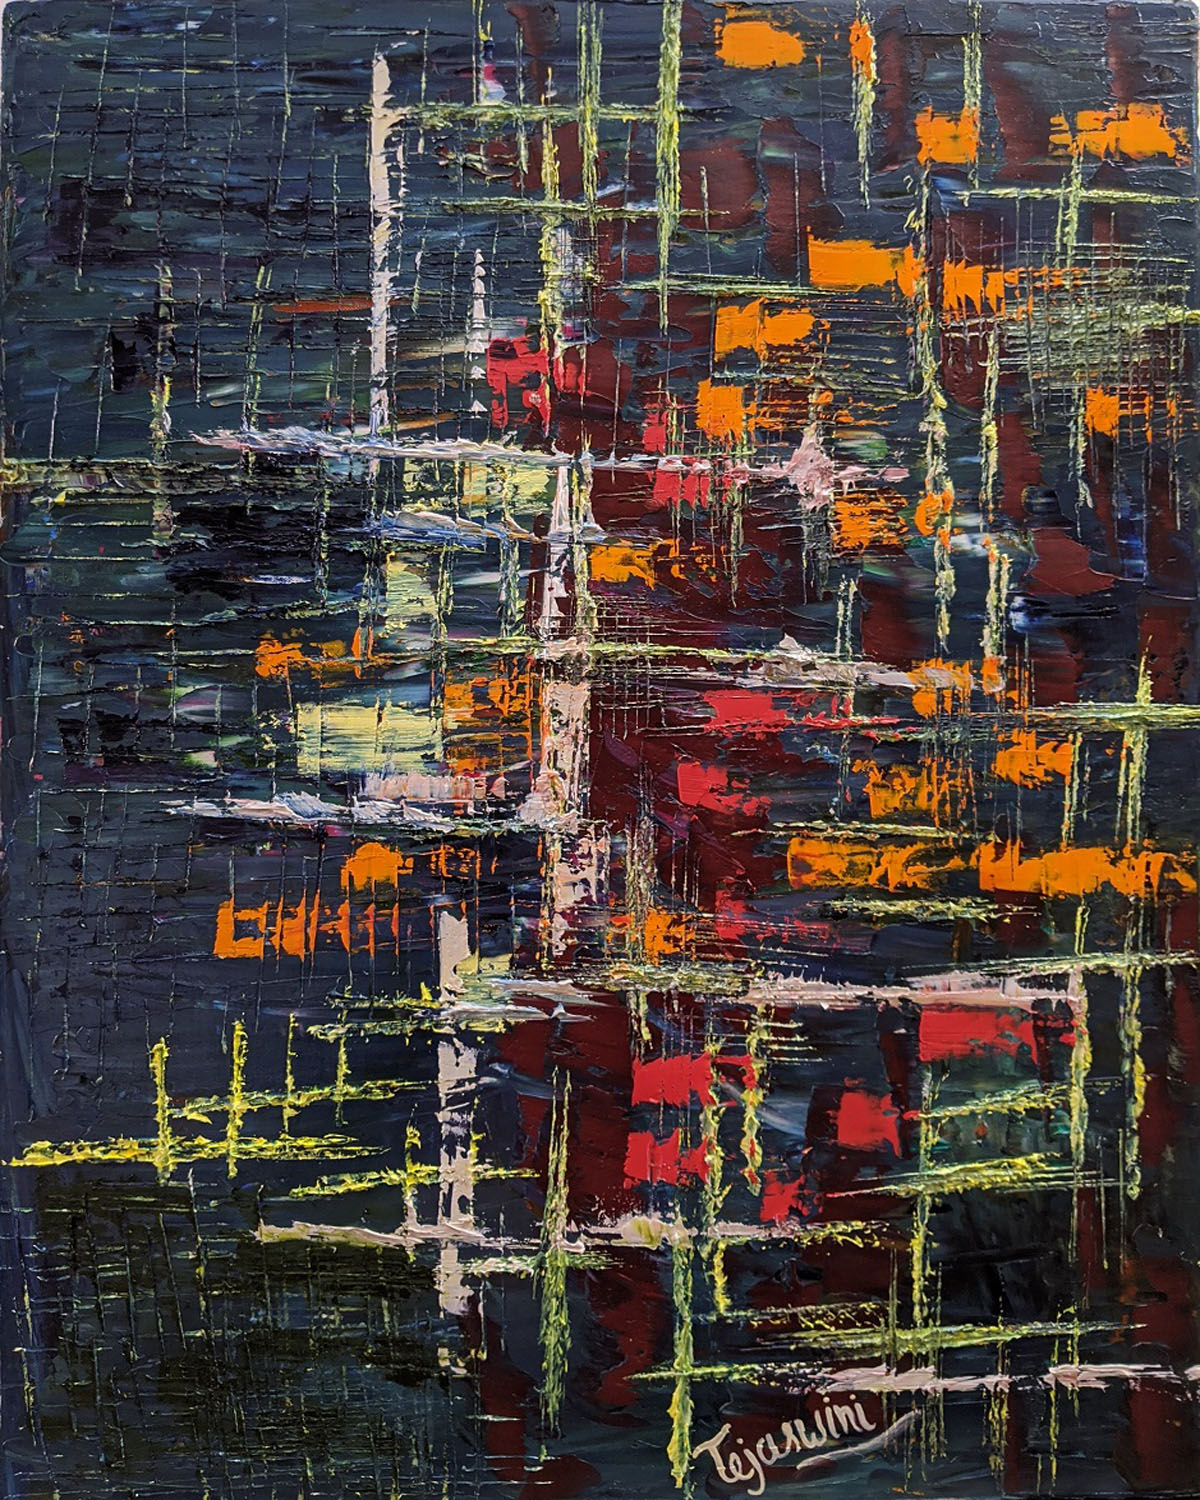 Mittal_alpana_ Abstract # 01_Oil on canvas_22 X 28 inches